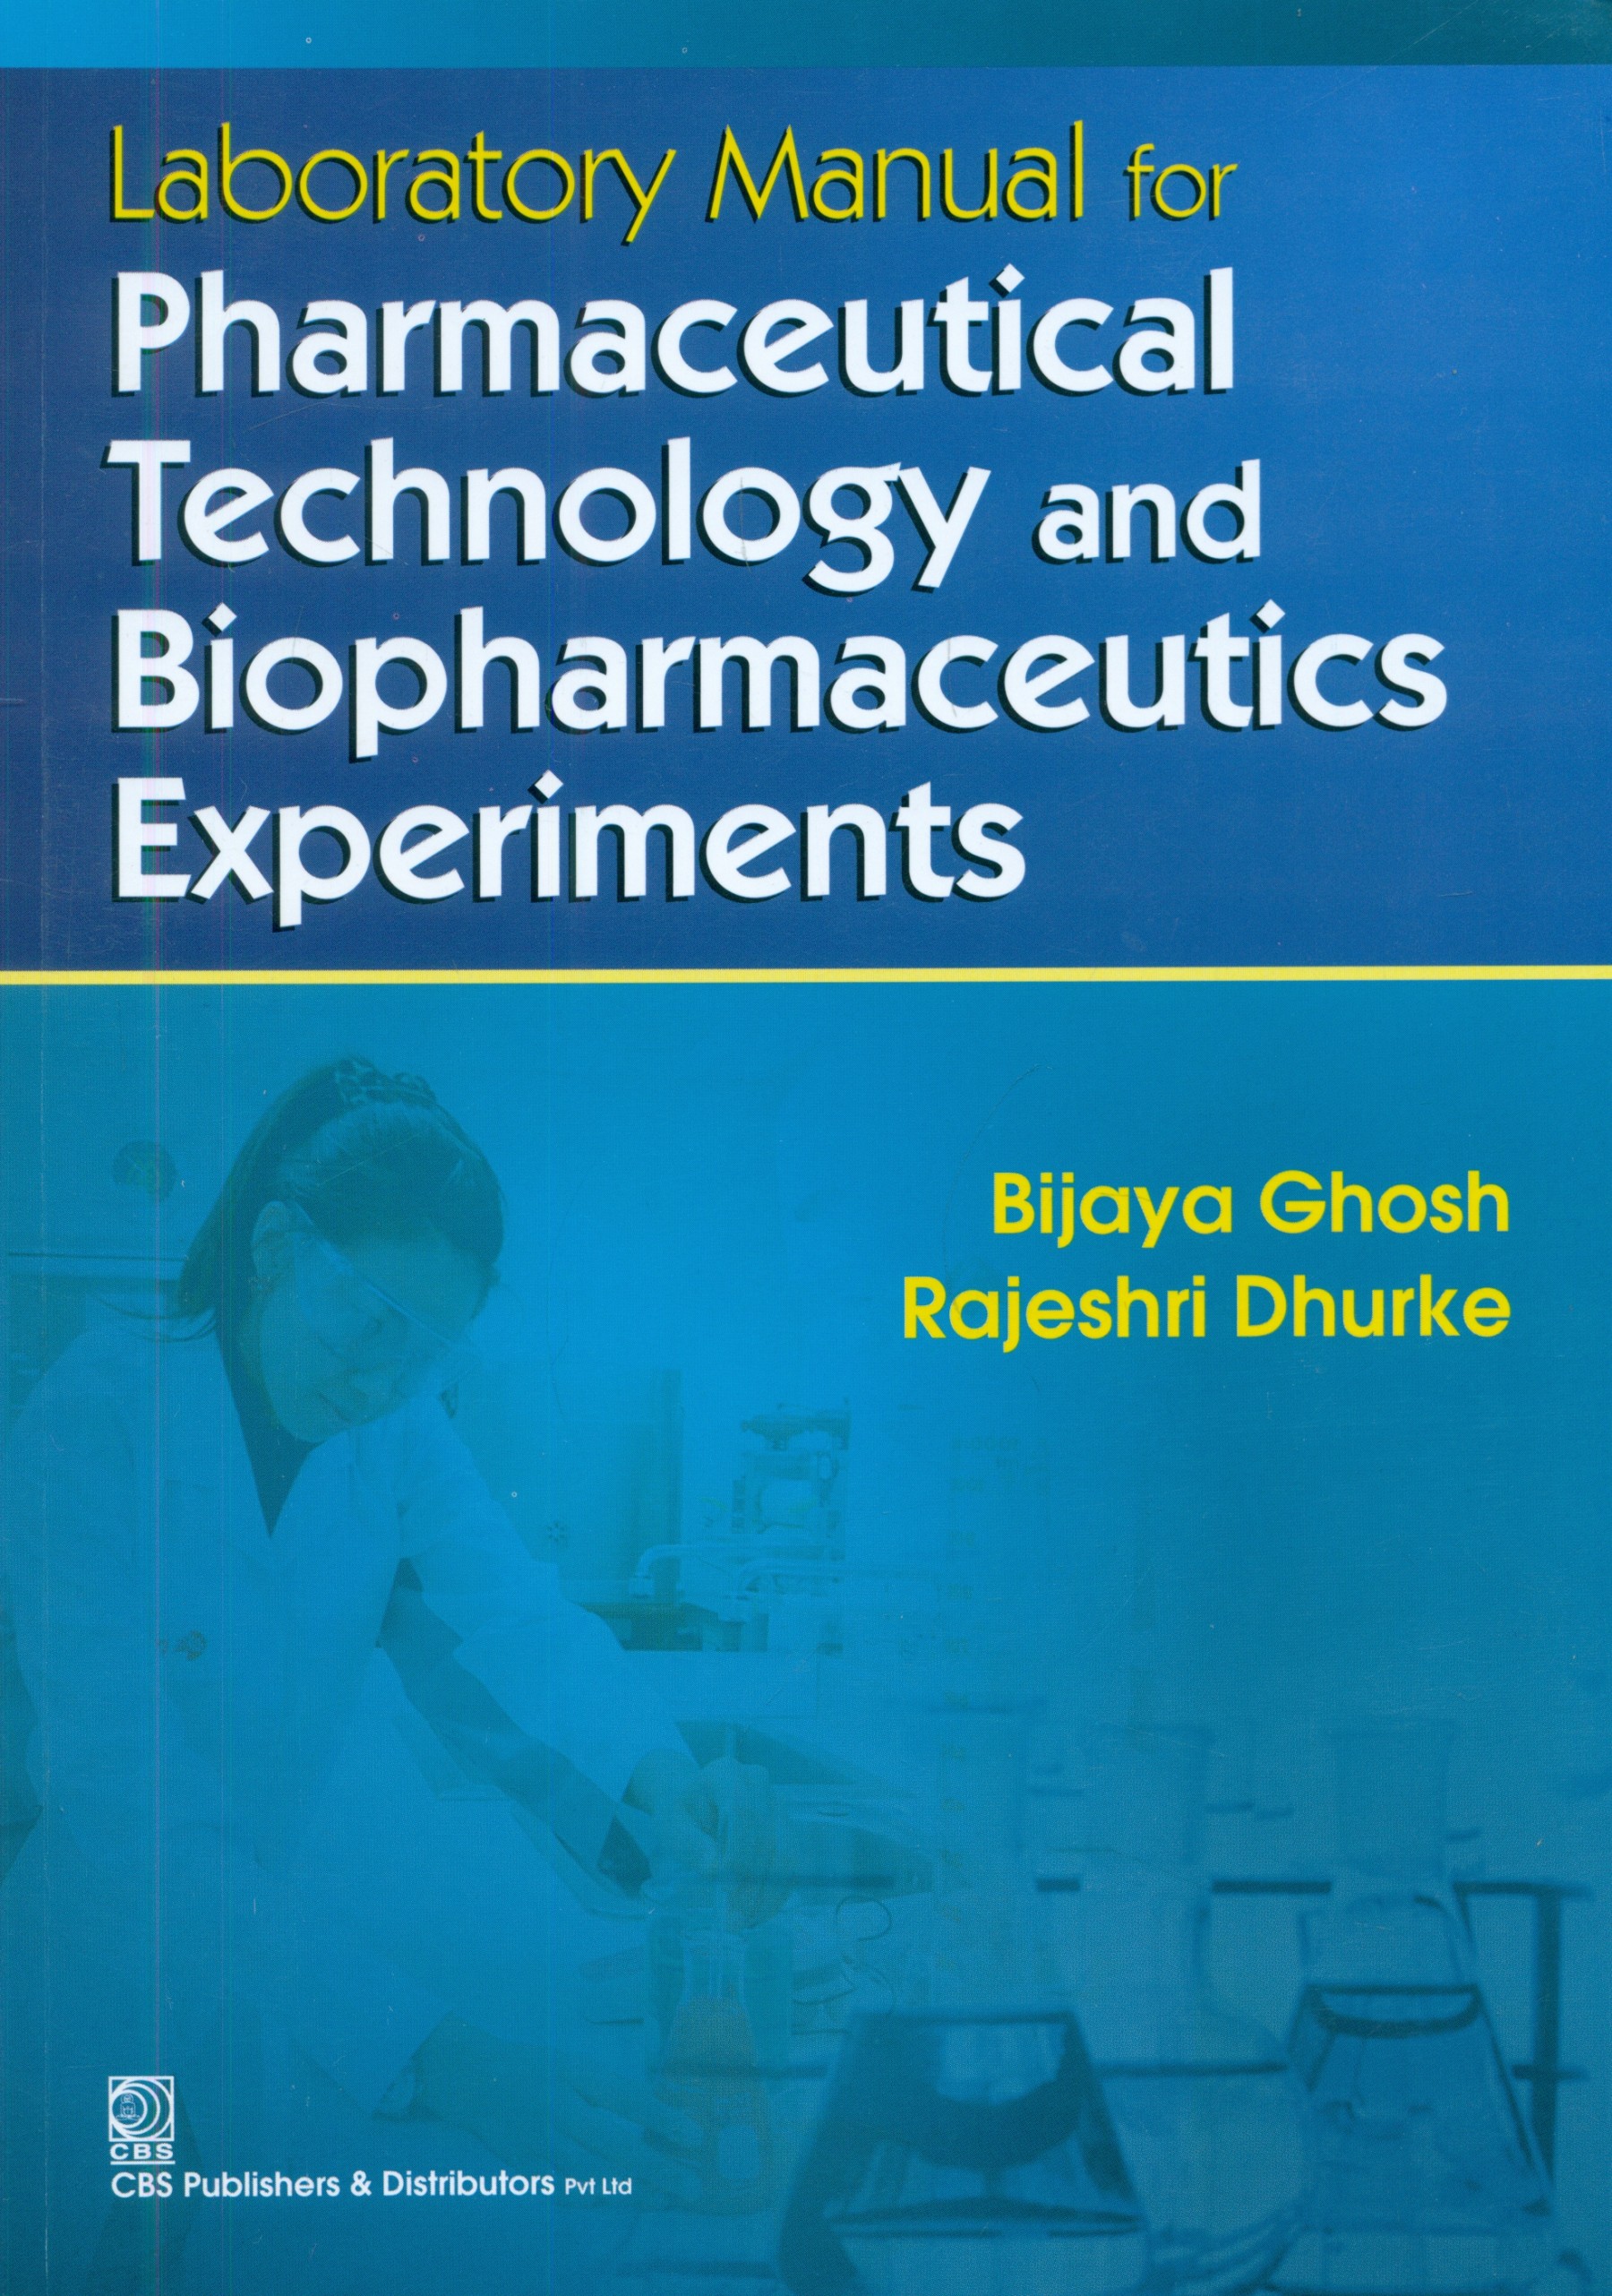 Laboratory Manual for Pharmaceutical Technology and Biopharmaceutics Experiments 